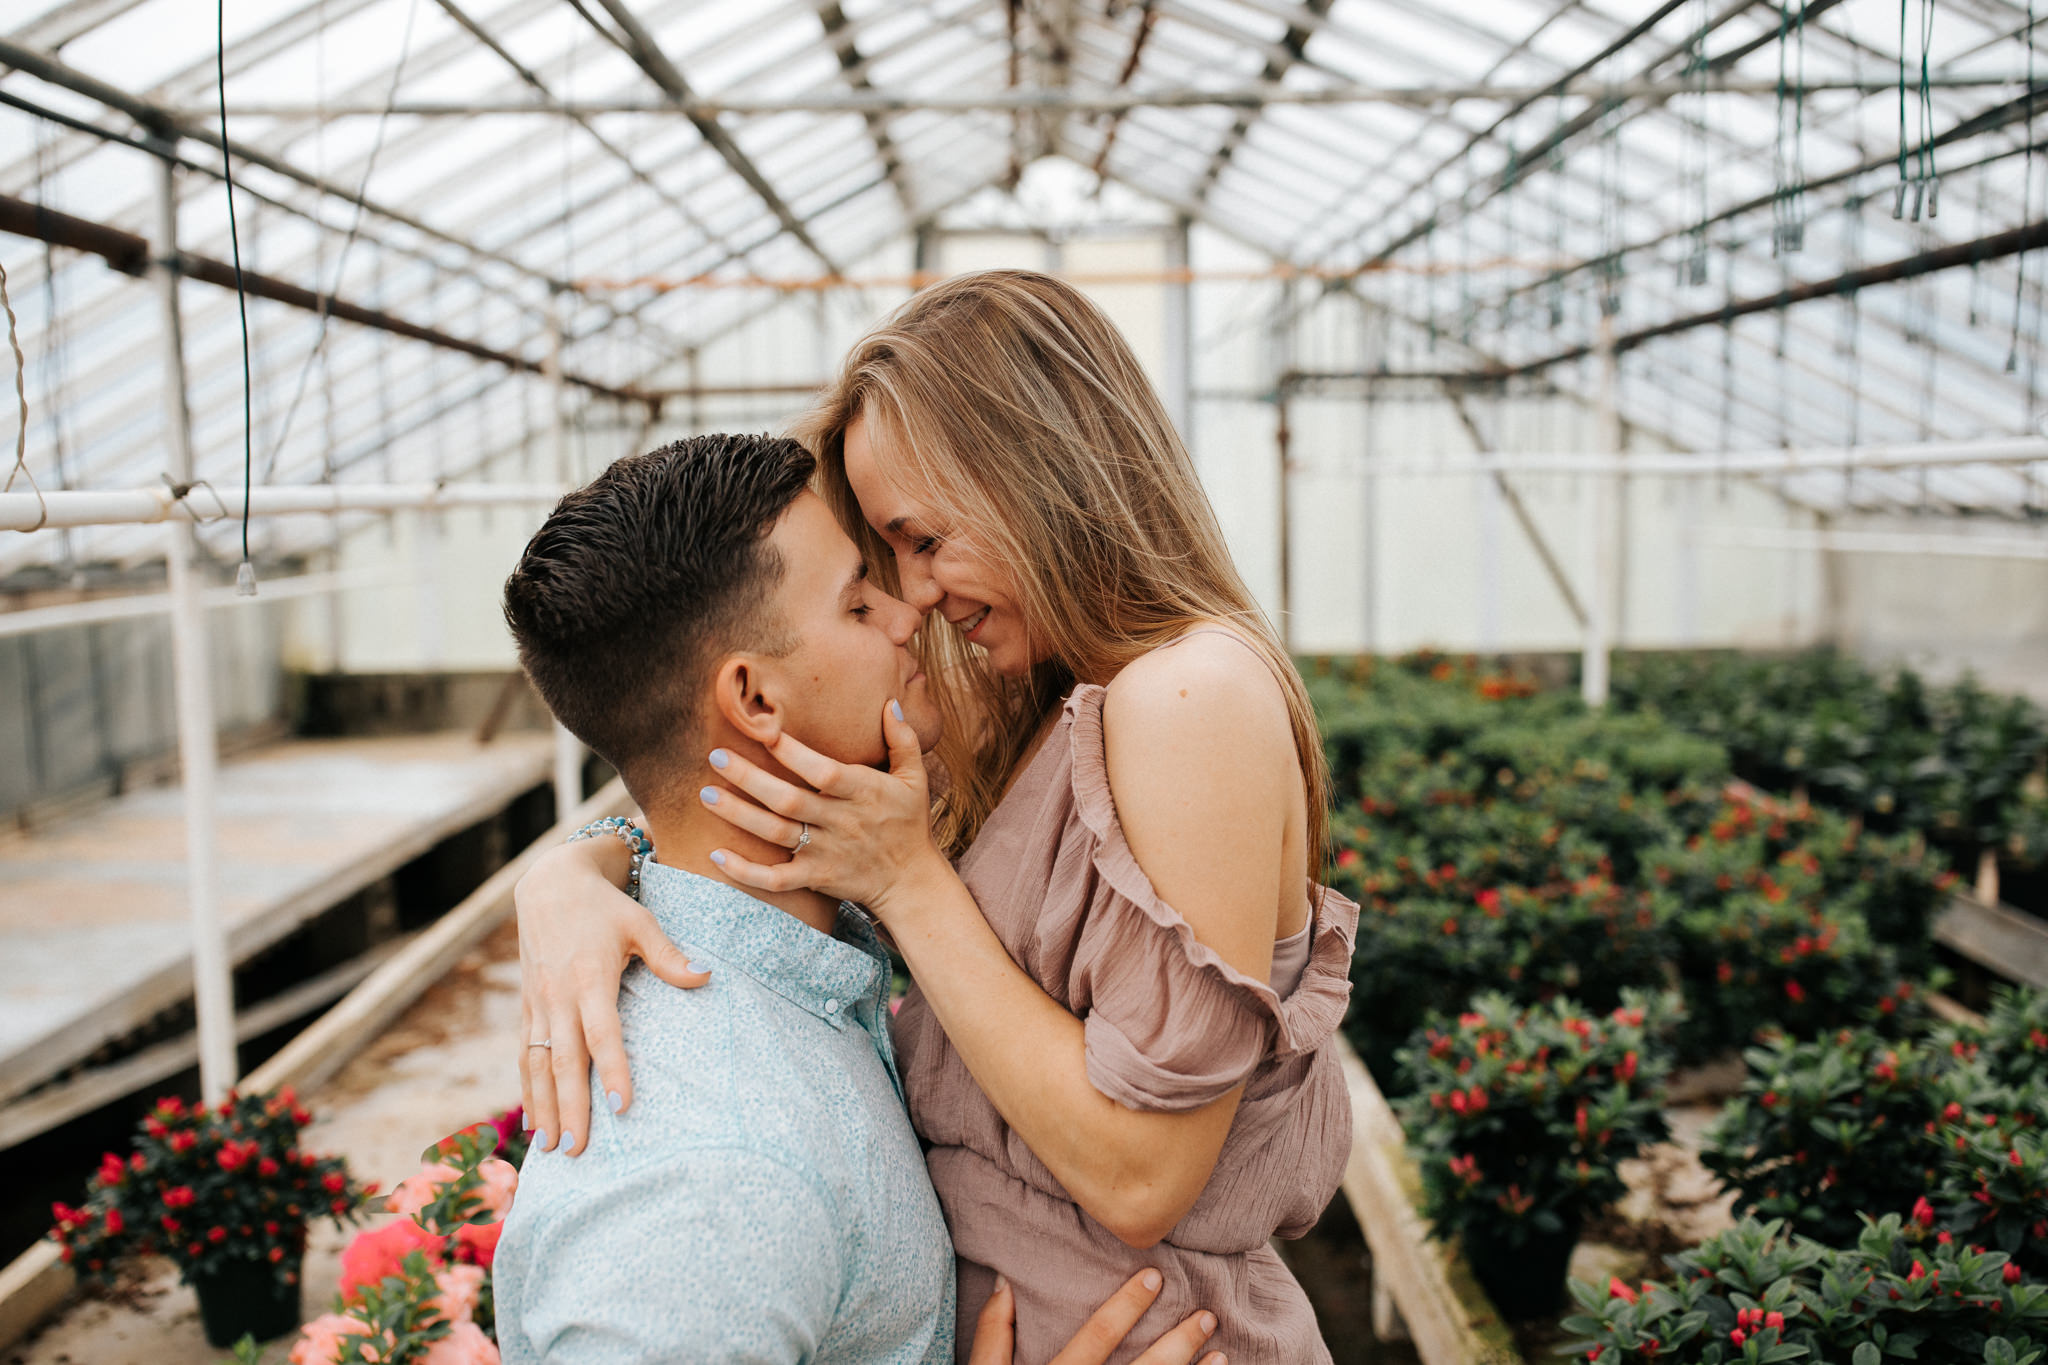 memphis-engagement-photographer-thewarmtharoundyou-greenhouse-engagement-pictures (79 of 118).jpg